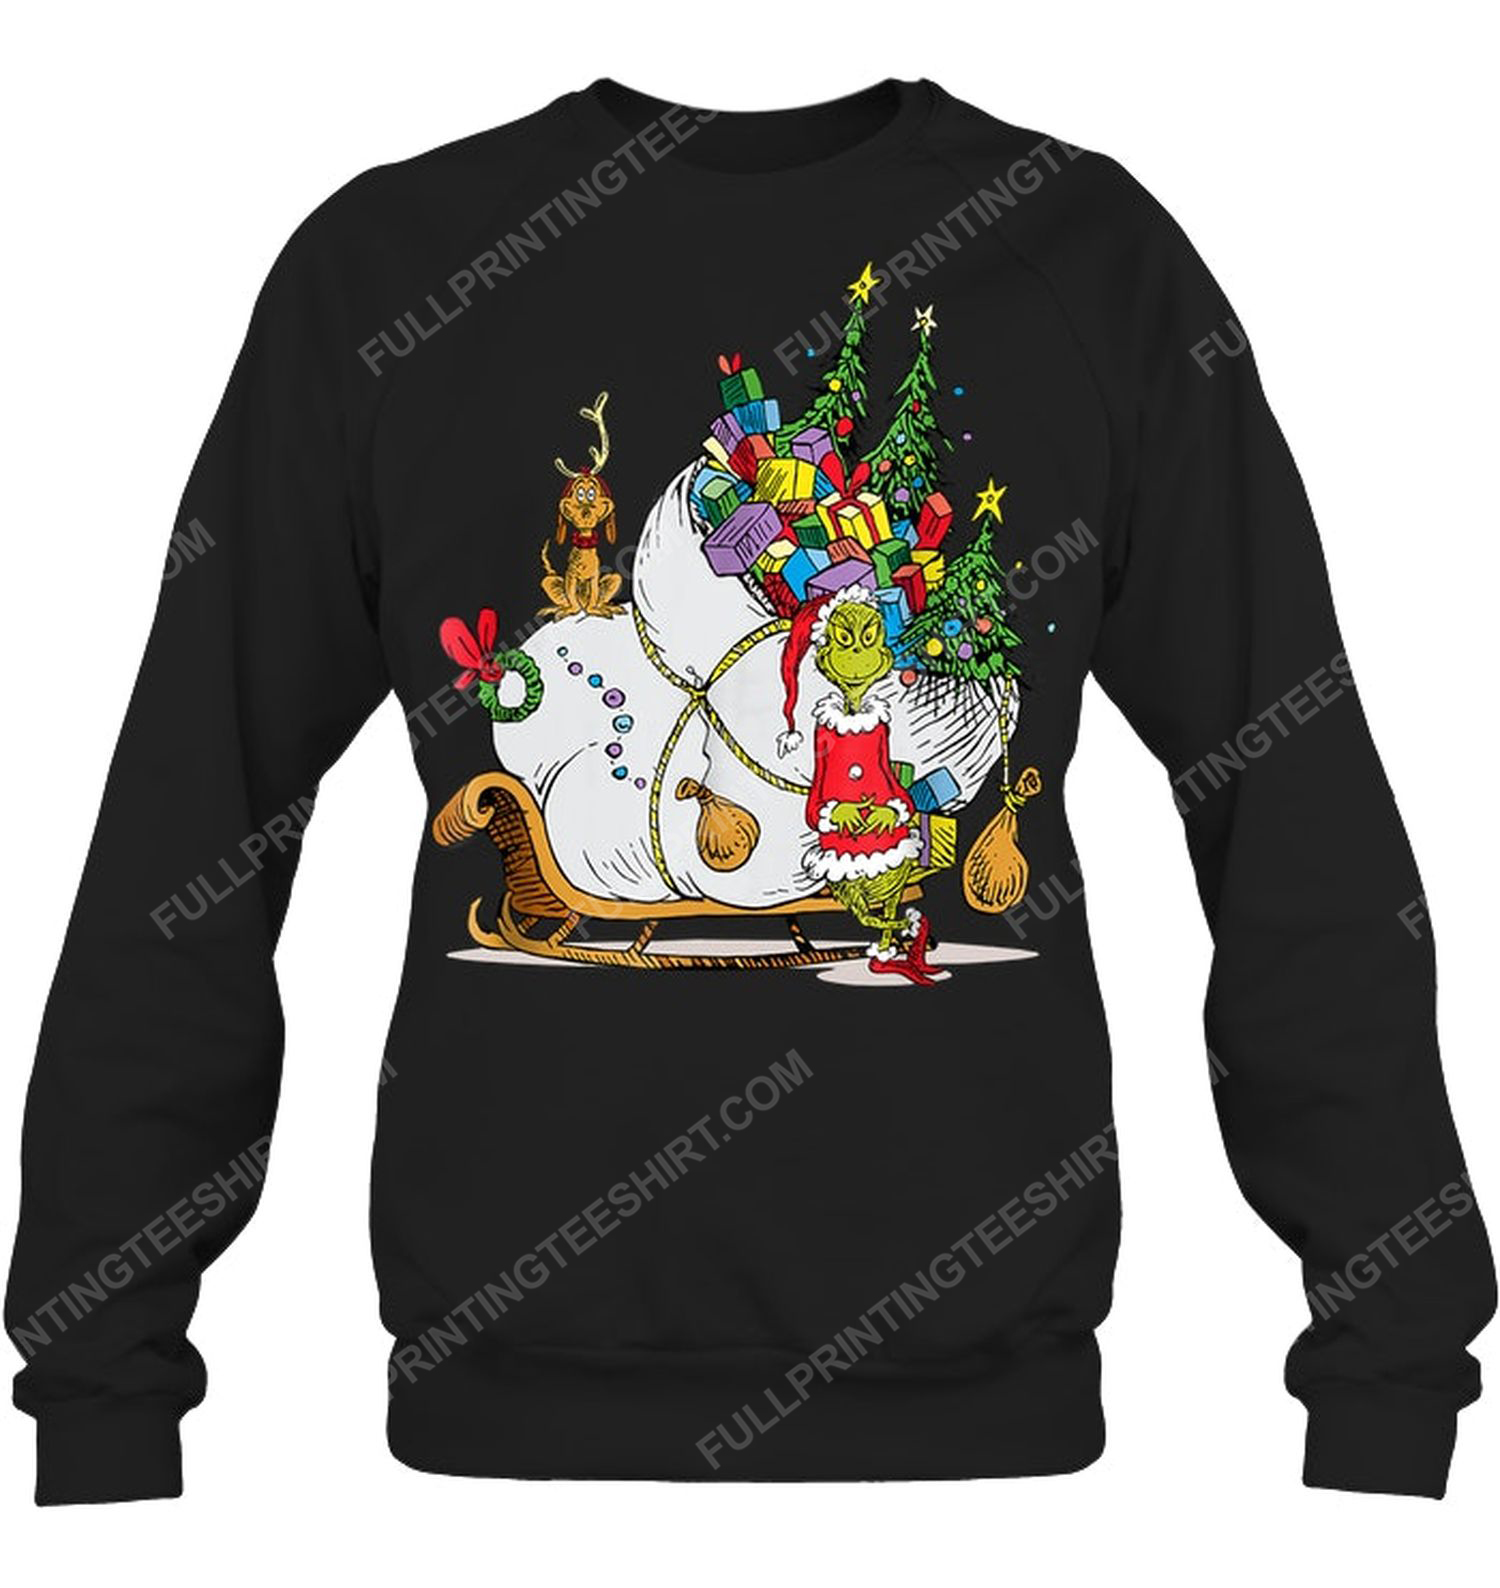 The grinch and christmas gifts sweatshirt